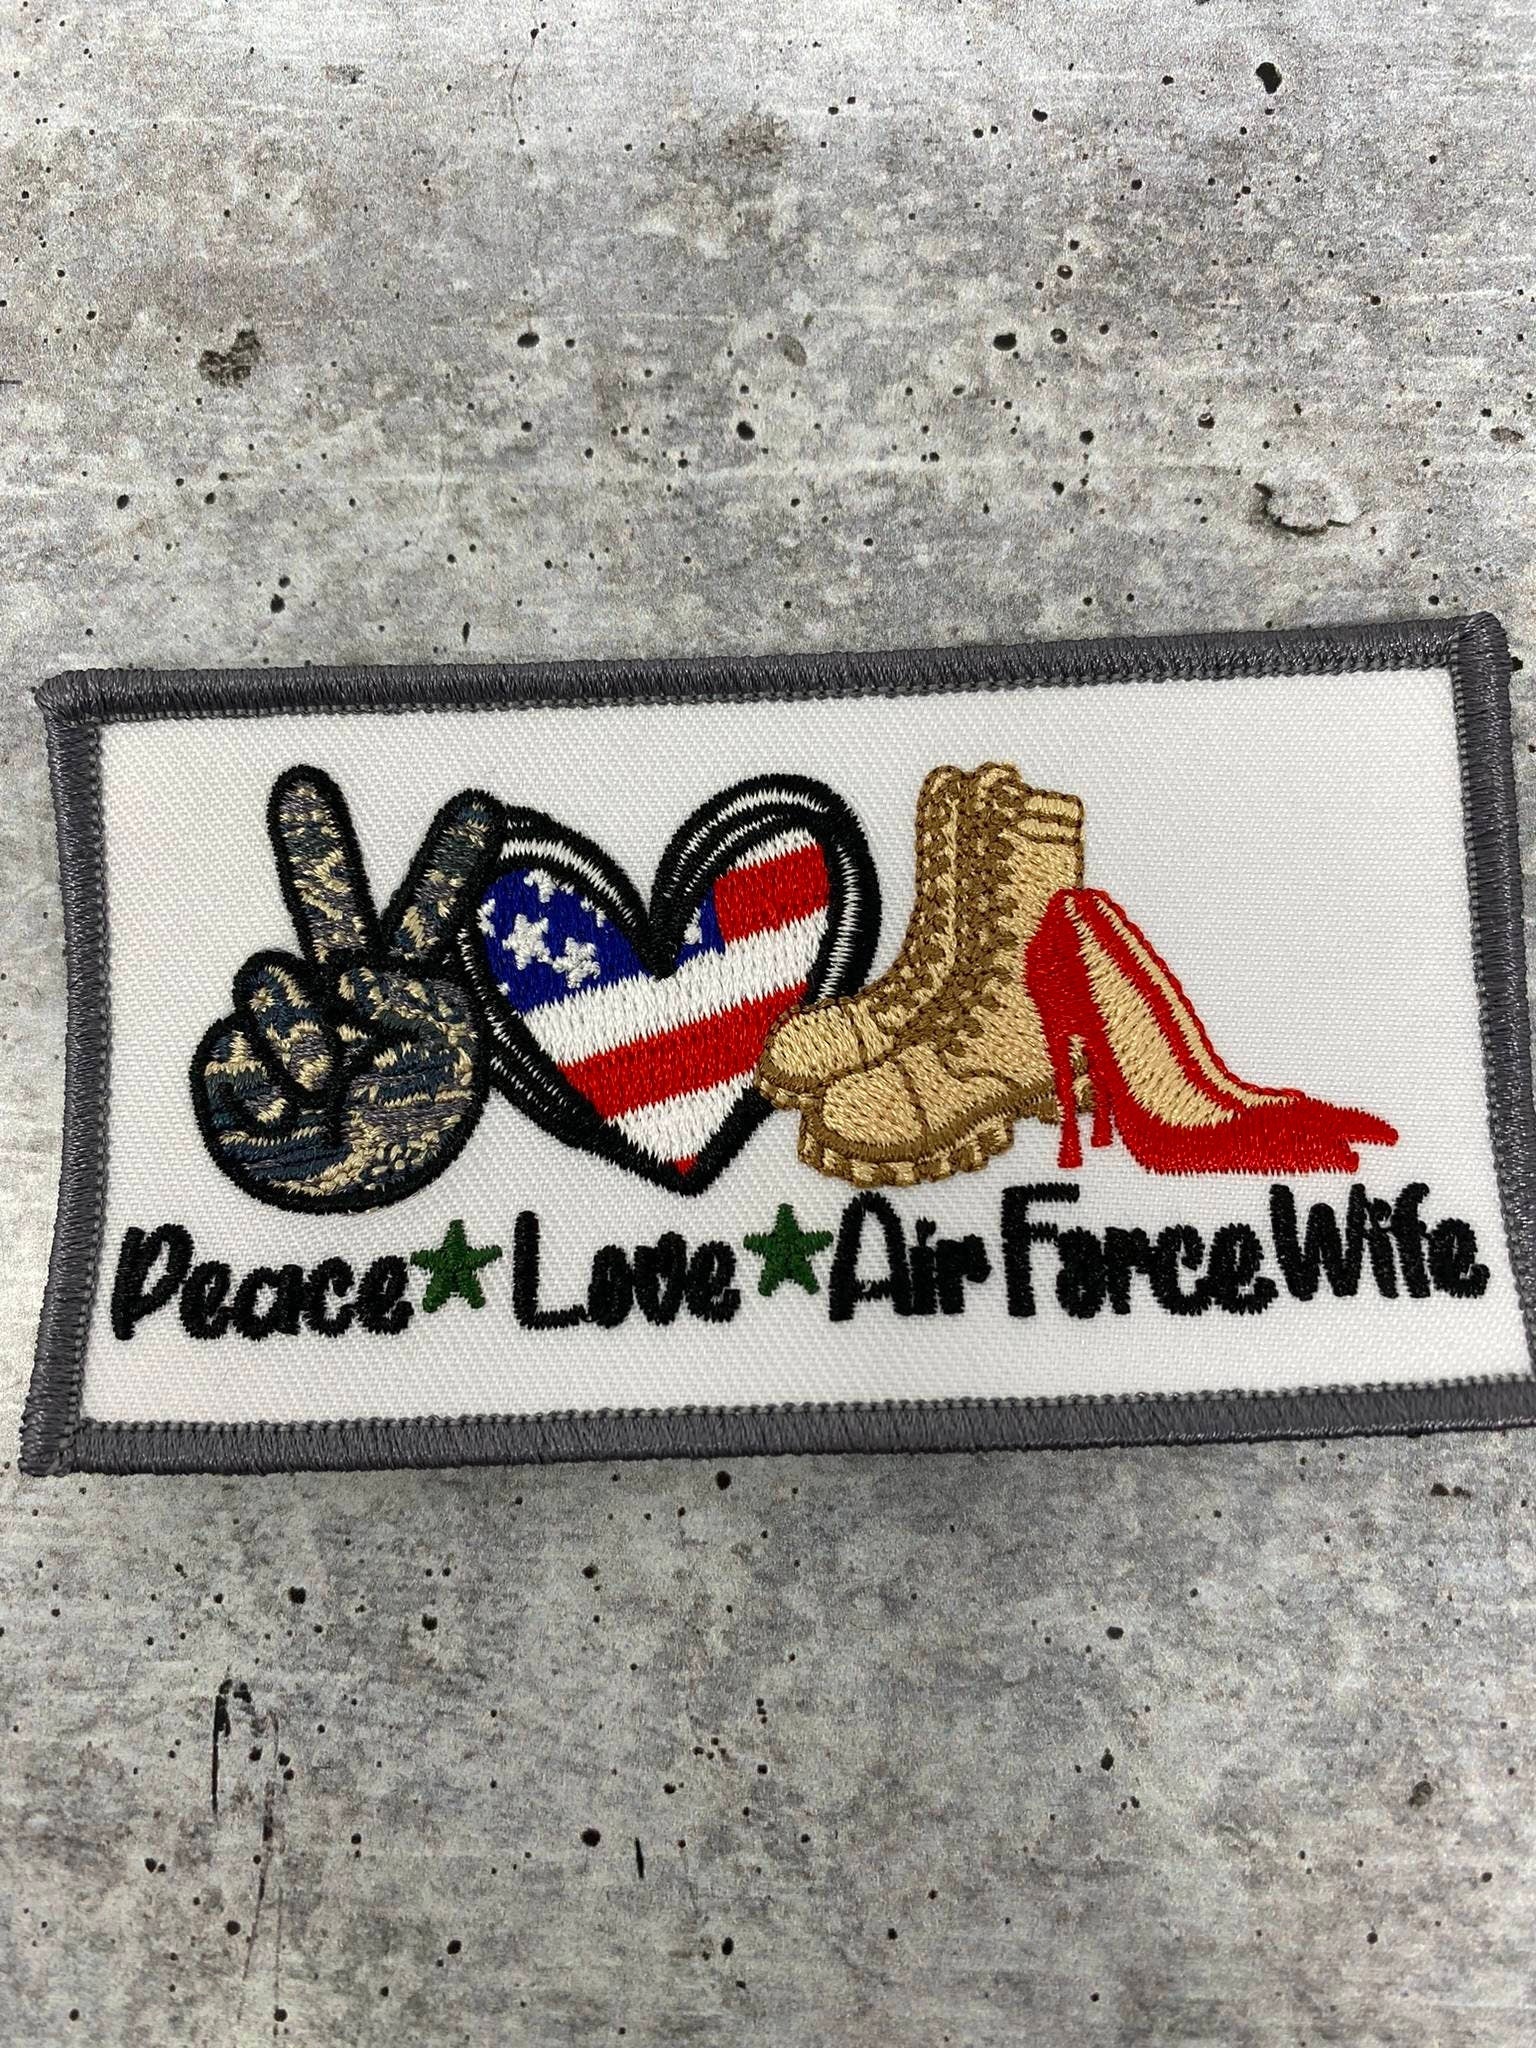 New, 1-pc, "Peace. Love. AIRFORCE Wife" Iron-on Patch, Embroidery Patch, Size 3"x 2", Military Wife Badge, Patch for Jackets, & DIY Crafts